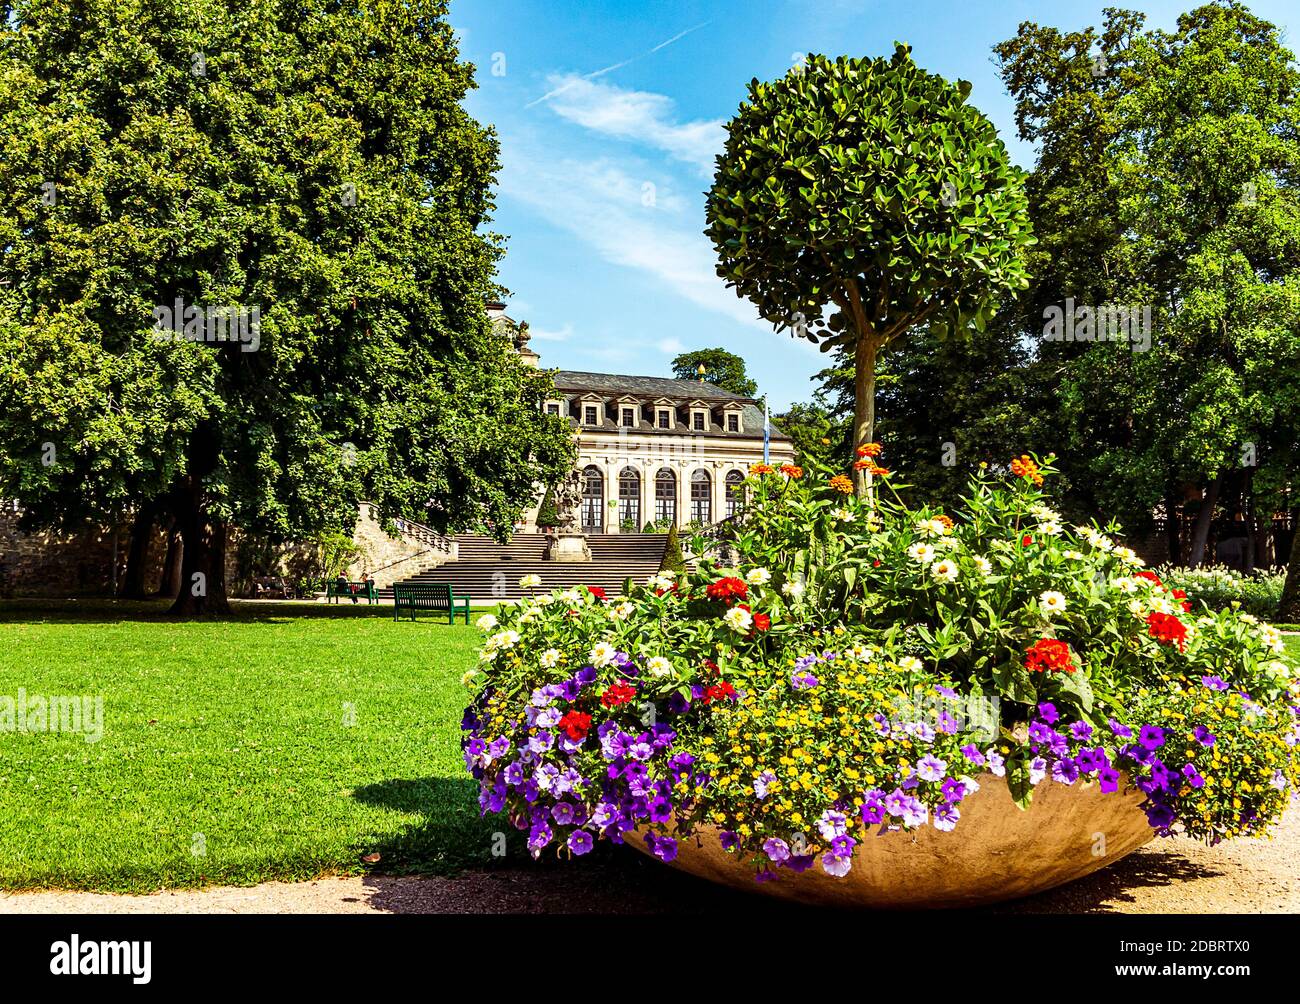 Fulda, Germany - The castle garden - green oasis in the heart of the city. Stock Photo